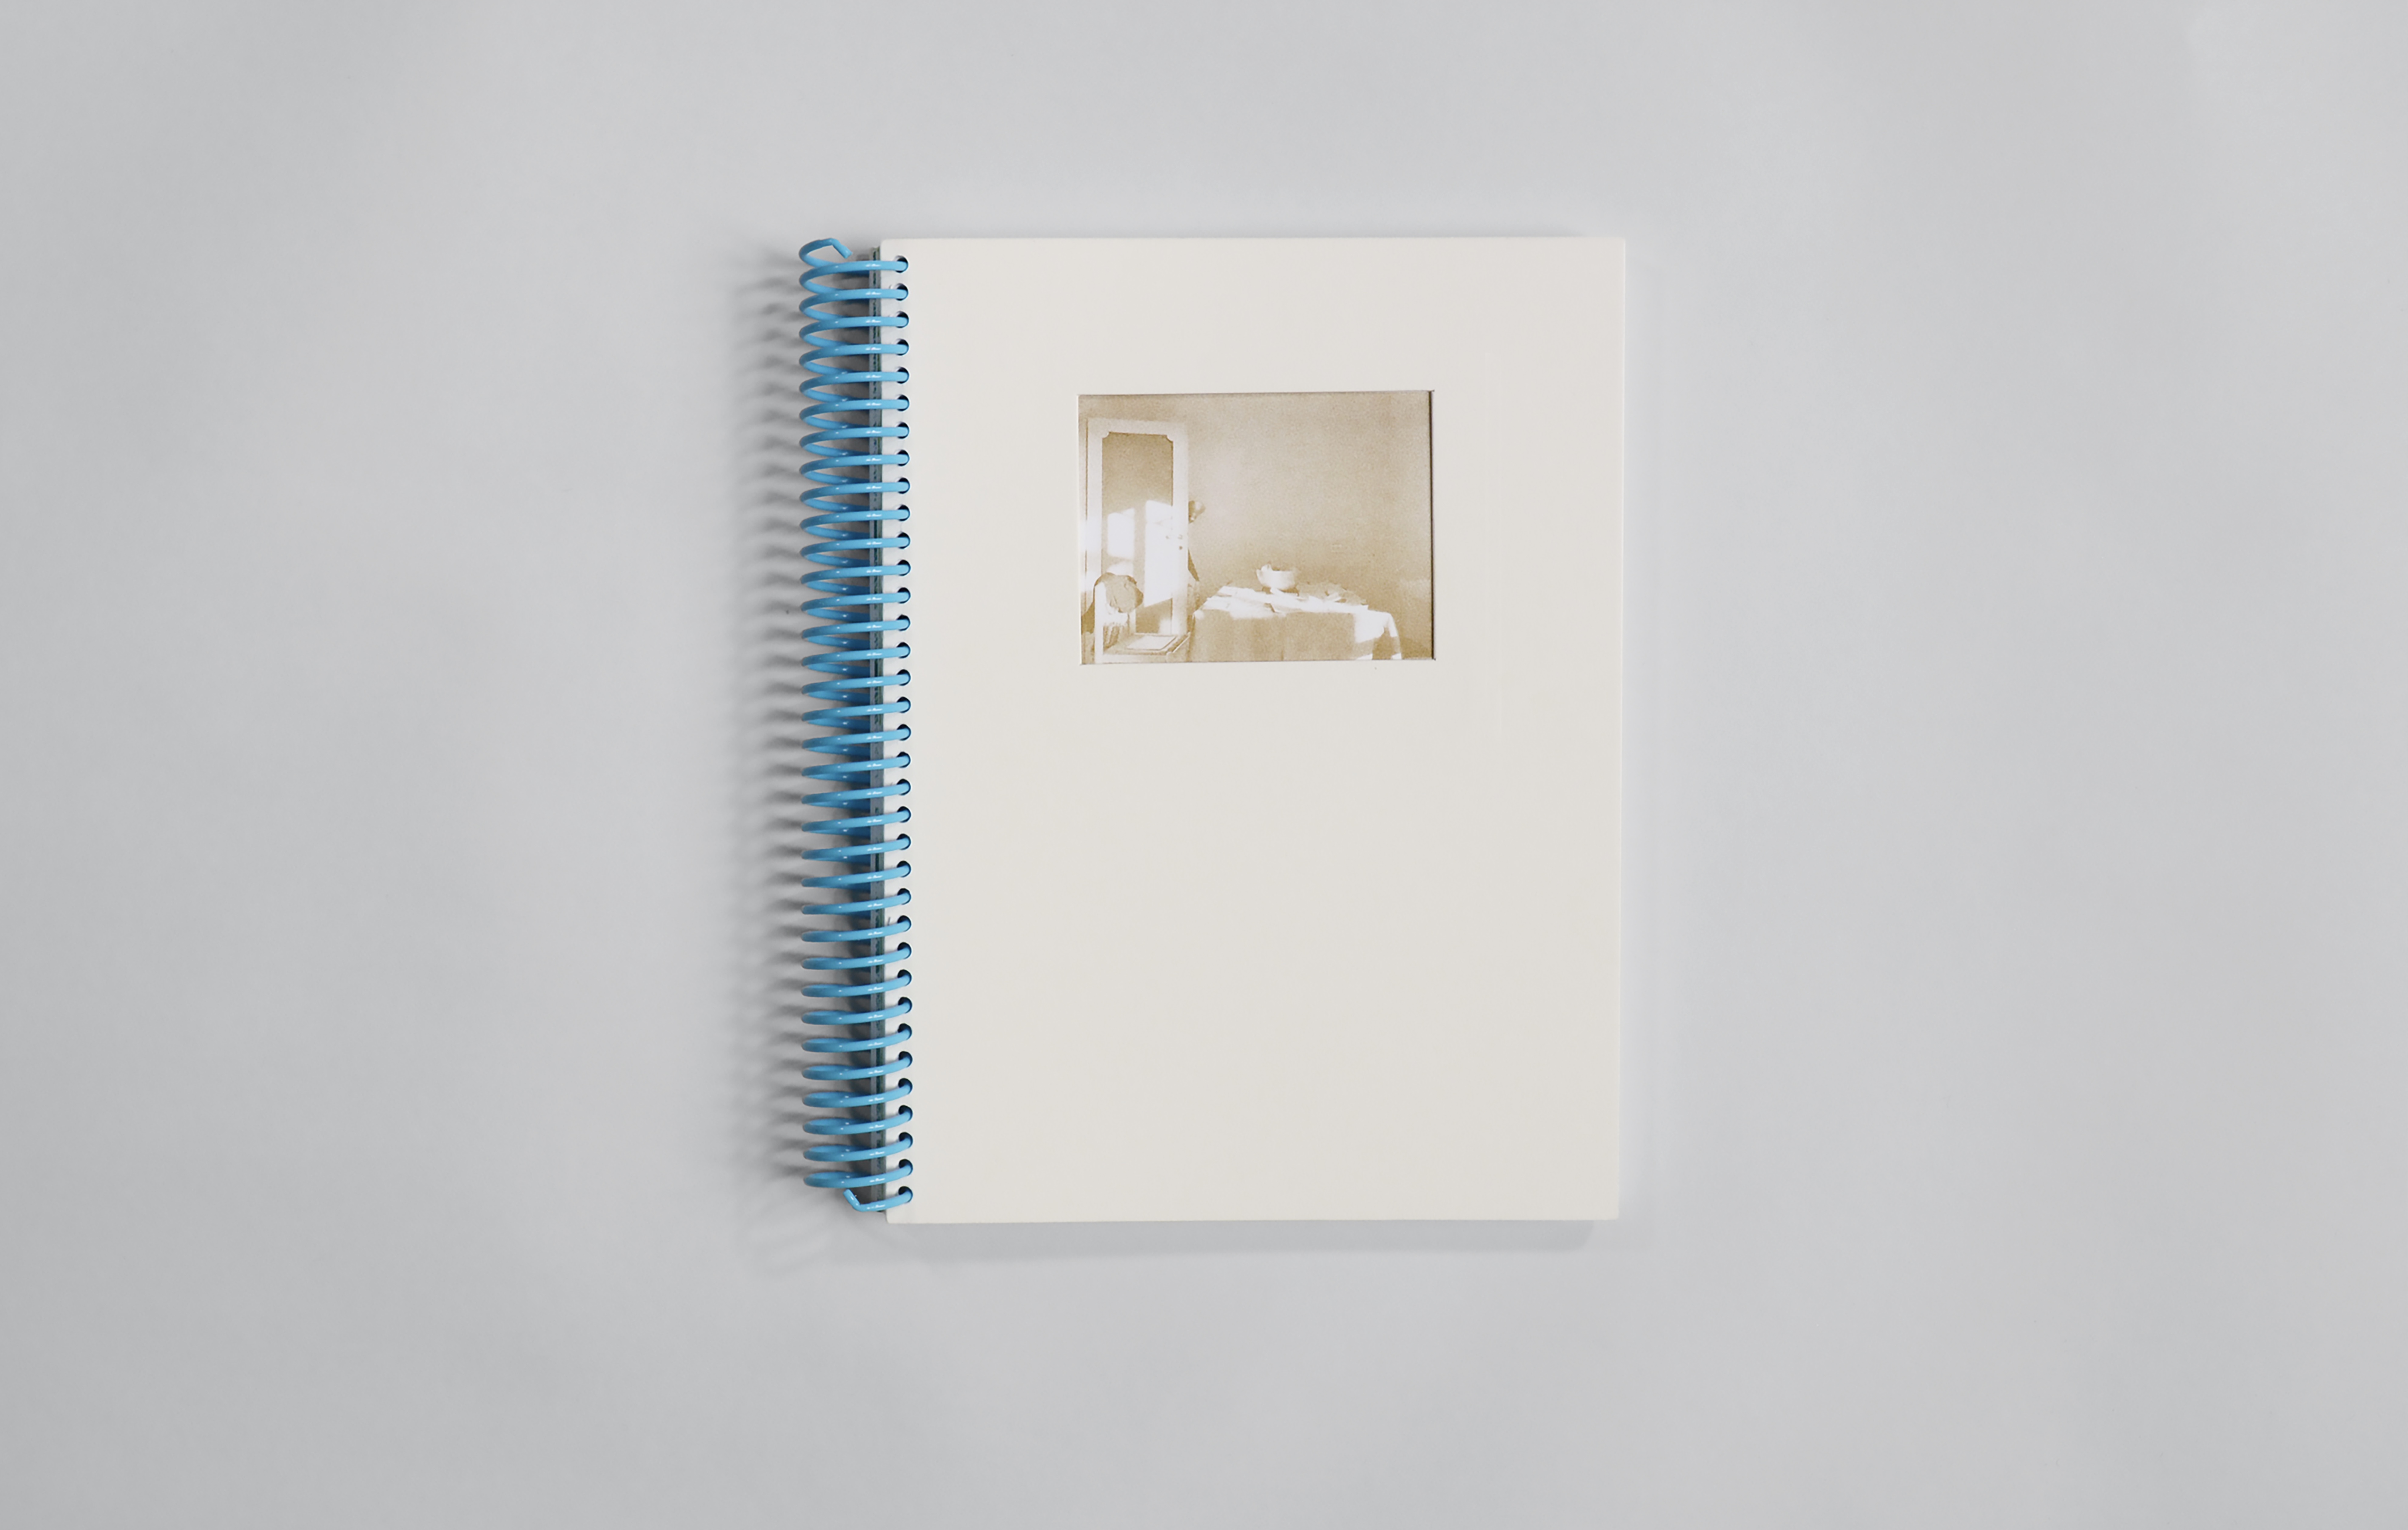 Front cover of exhibition catalog with die-cut window on white cardstock revealing brown risograph-printed image of a table and mirror. Bound with a blue spiral coil.